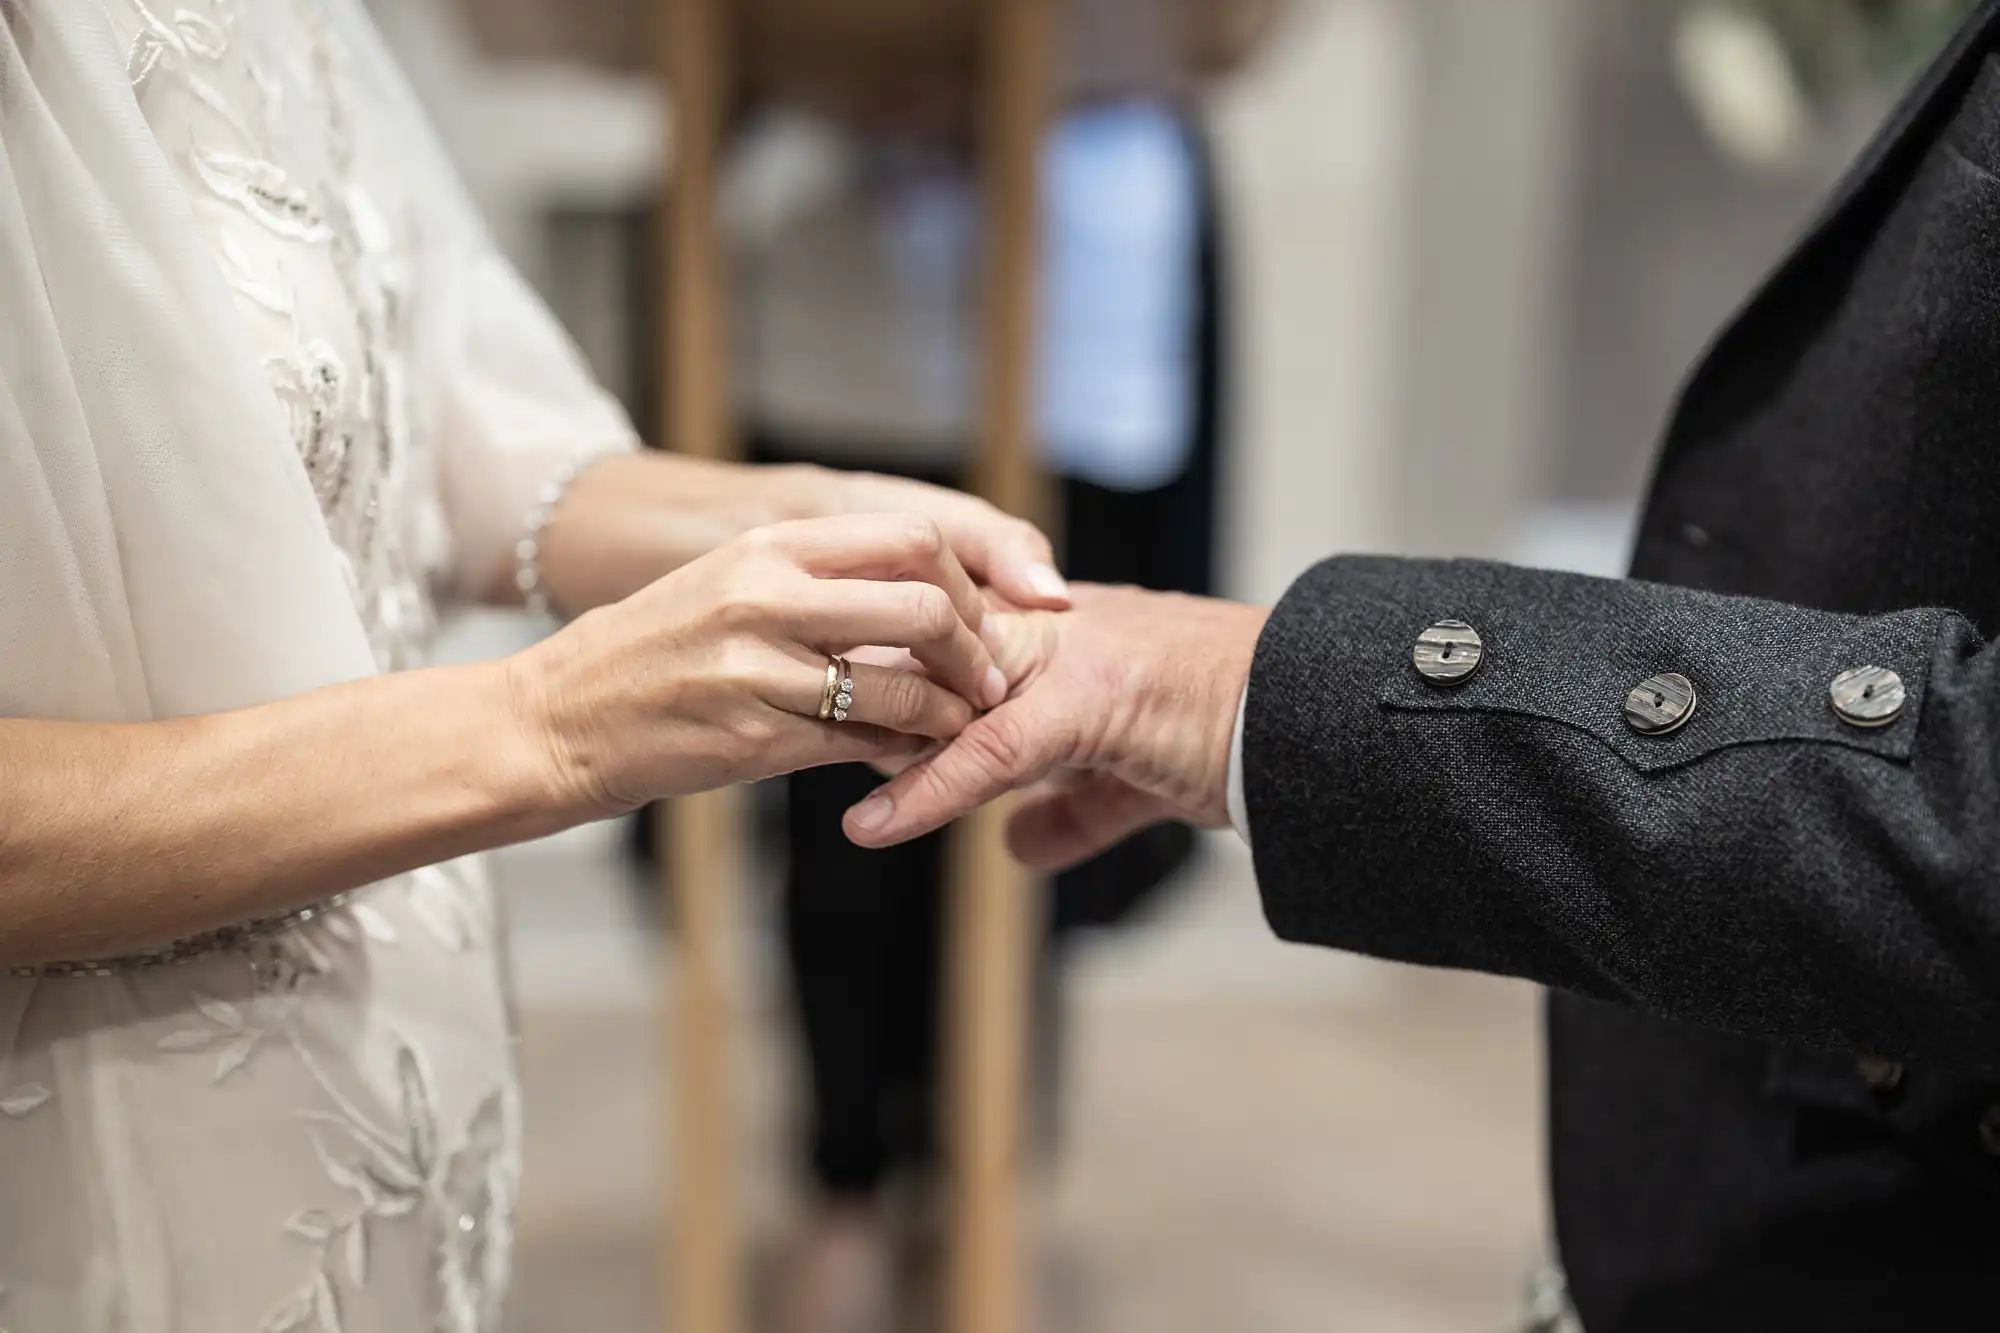 Close-up of a person placing a ring on another person's finger in a wedding ceremony setting.